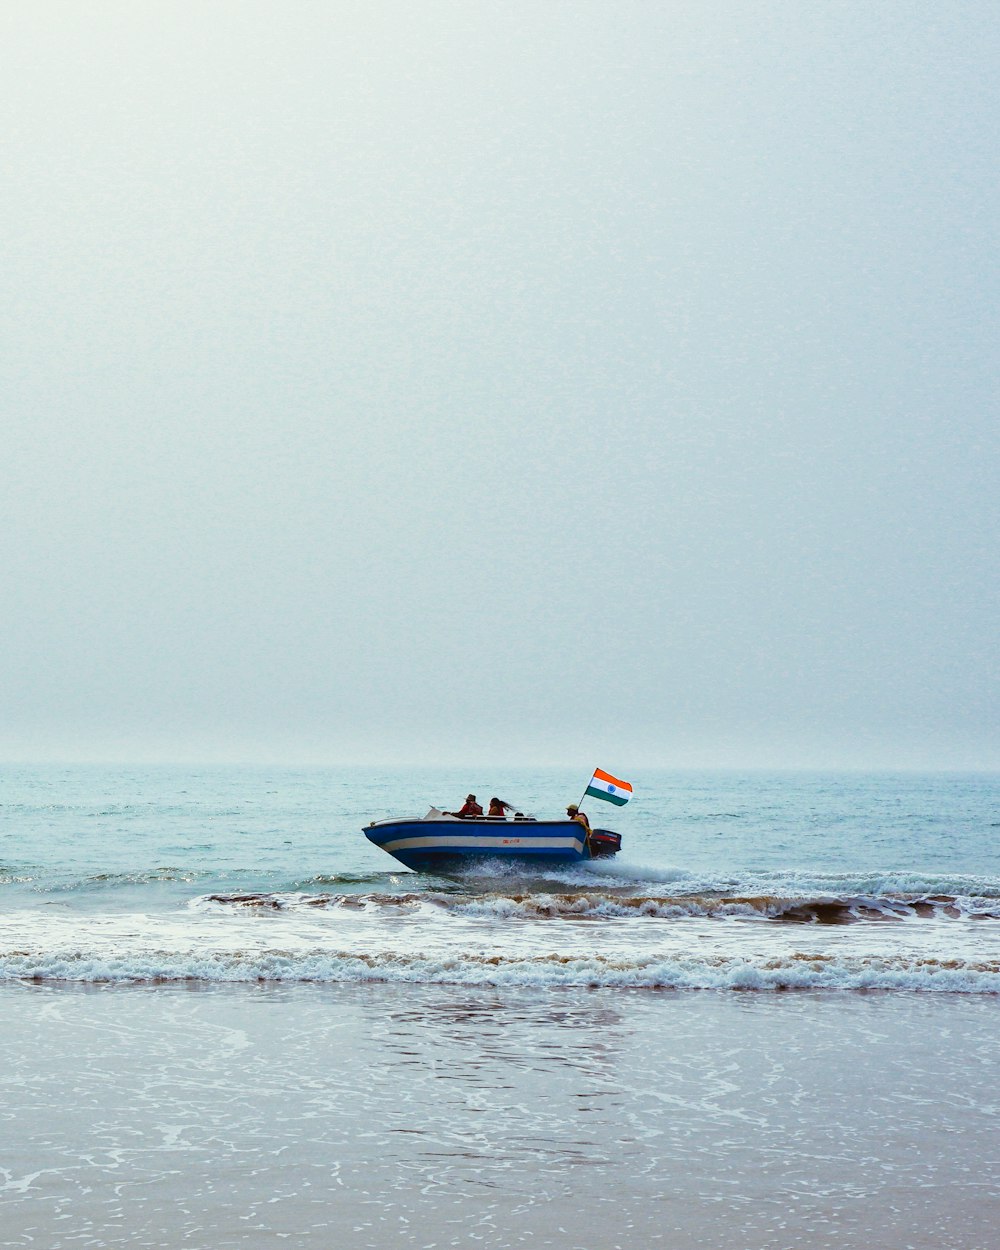 a small boat with two people on it in the ocean